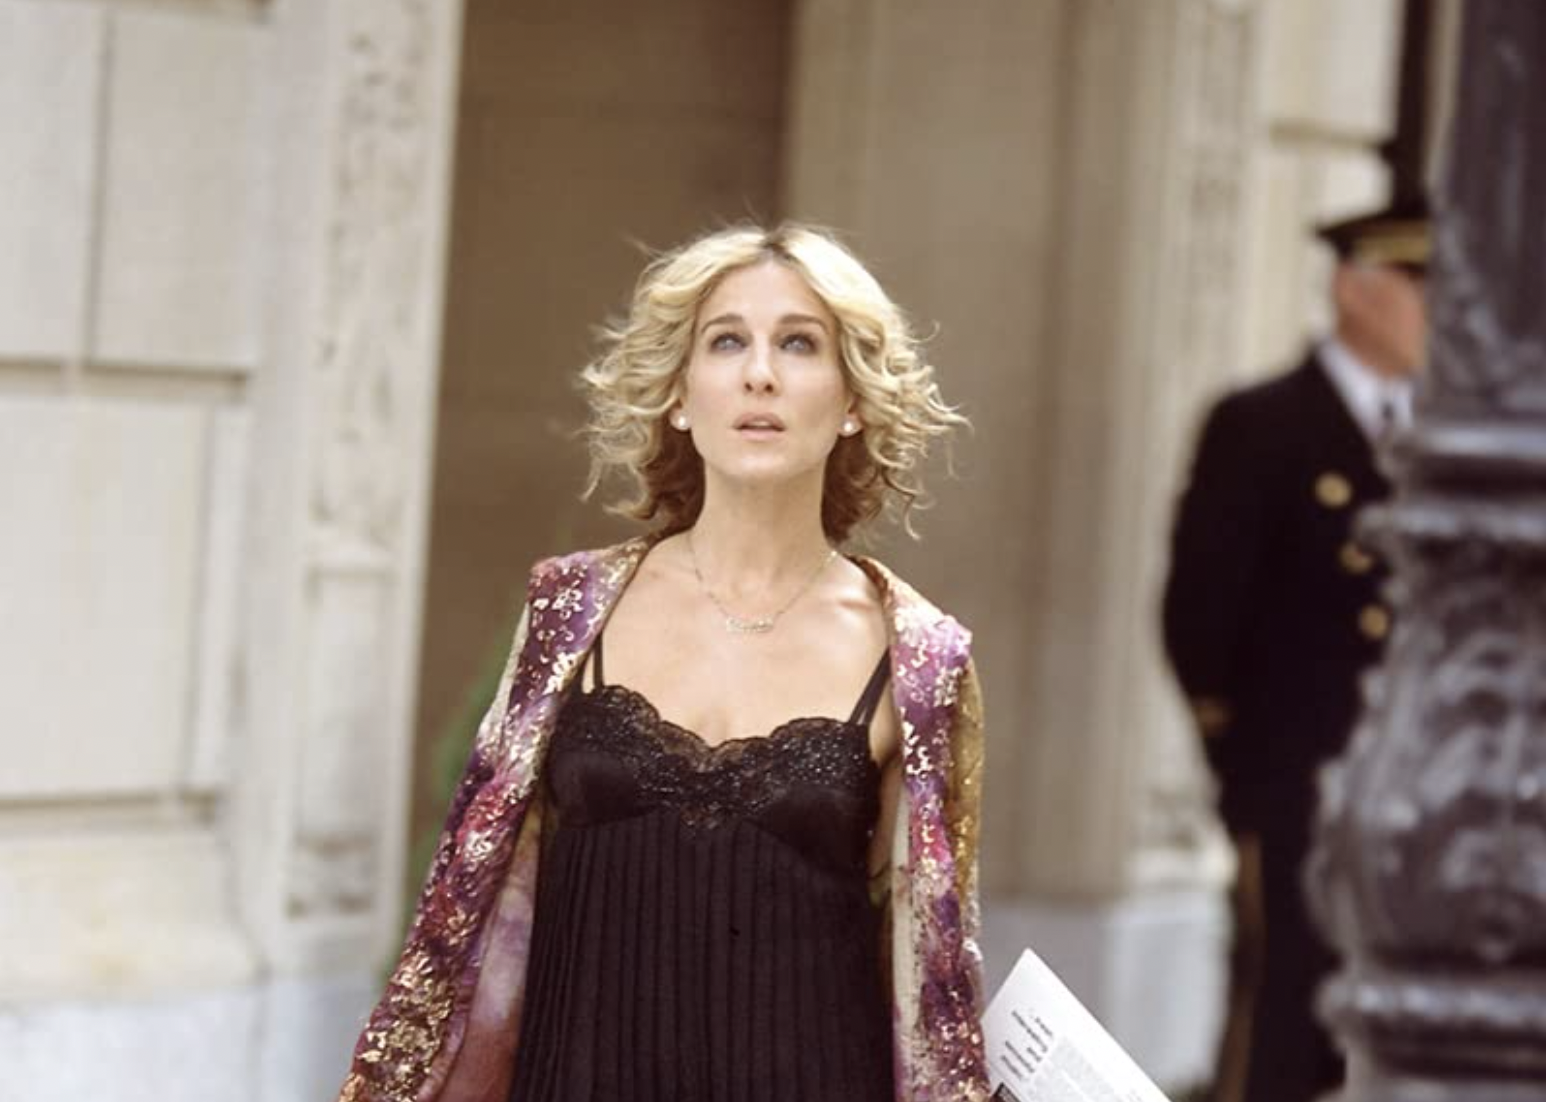 Sarah Jessica Parker in a scene from "Sex and the City."